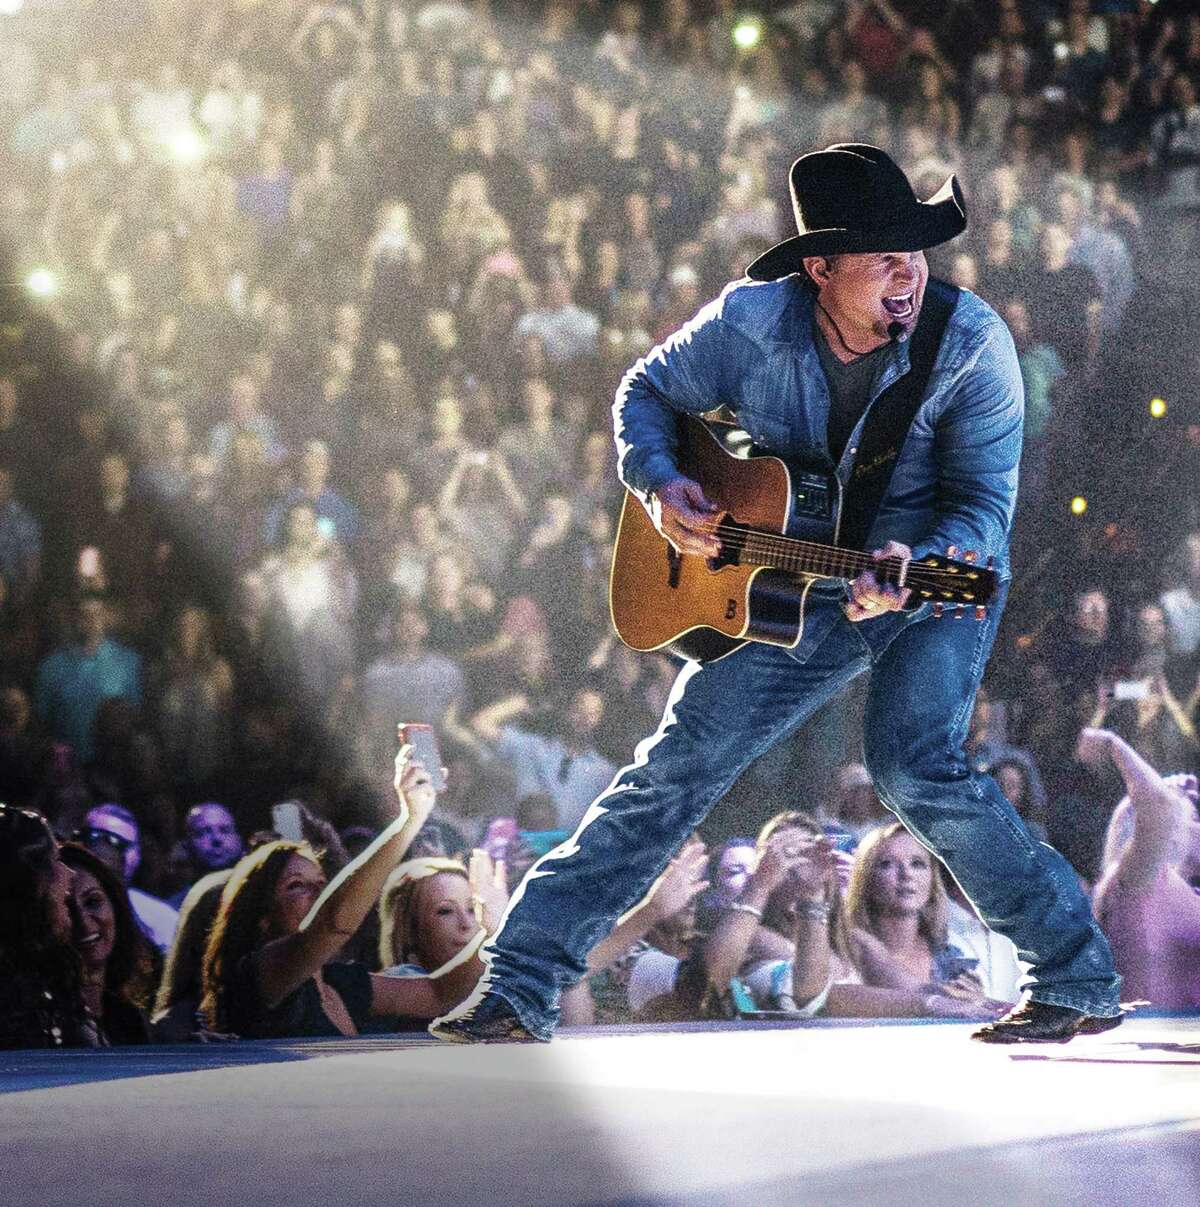 ﻿Garth Brooks is opening and closing RodeoHouston 2018.